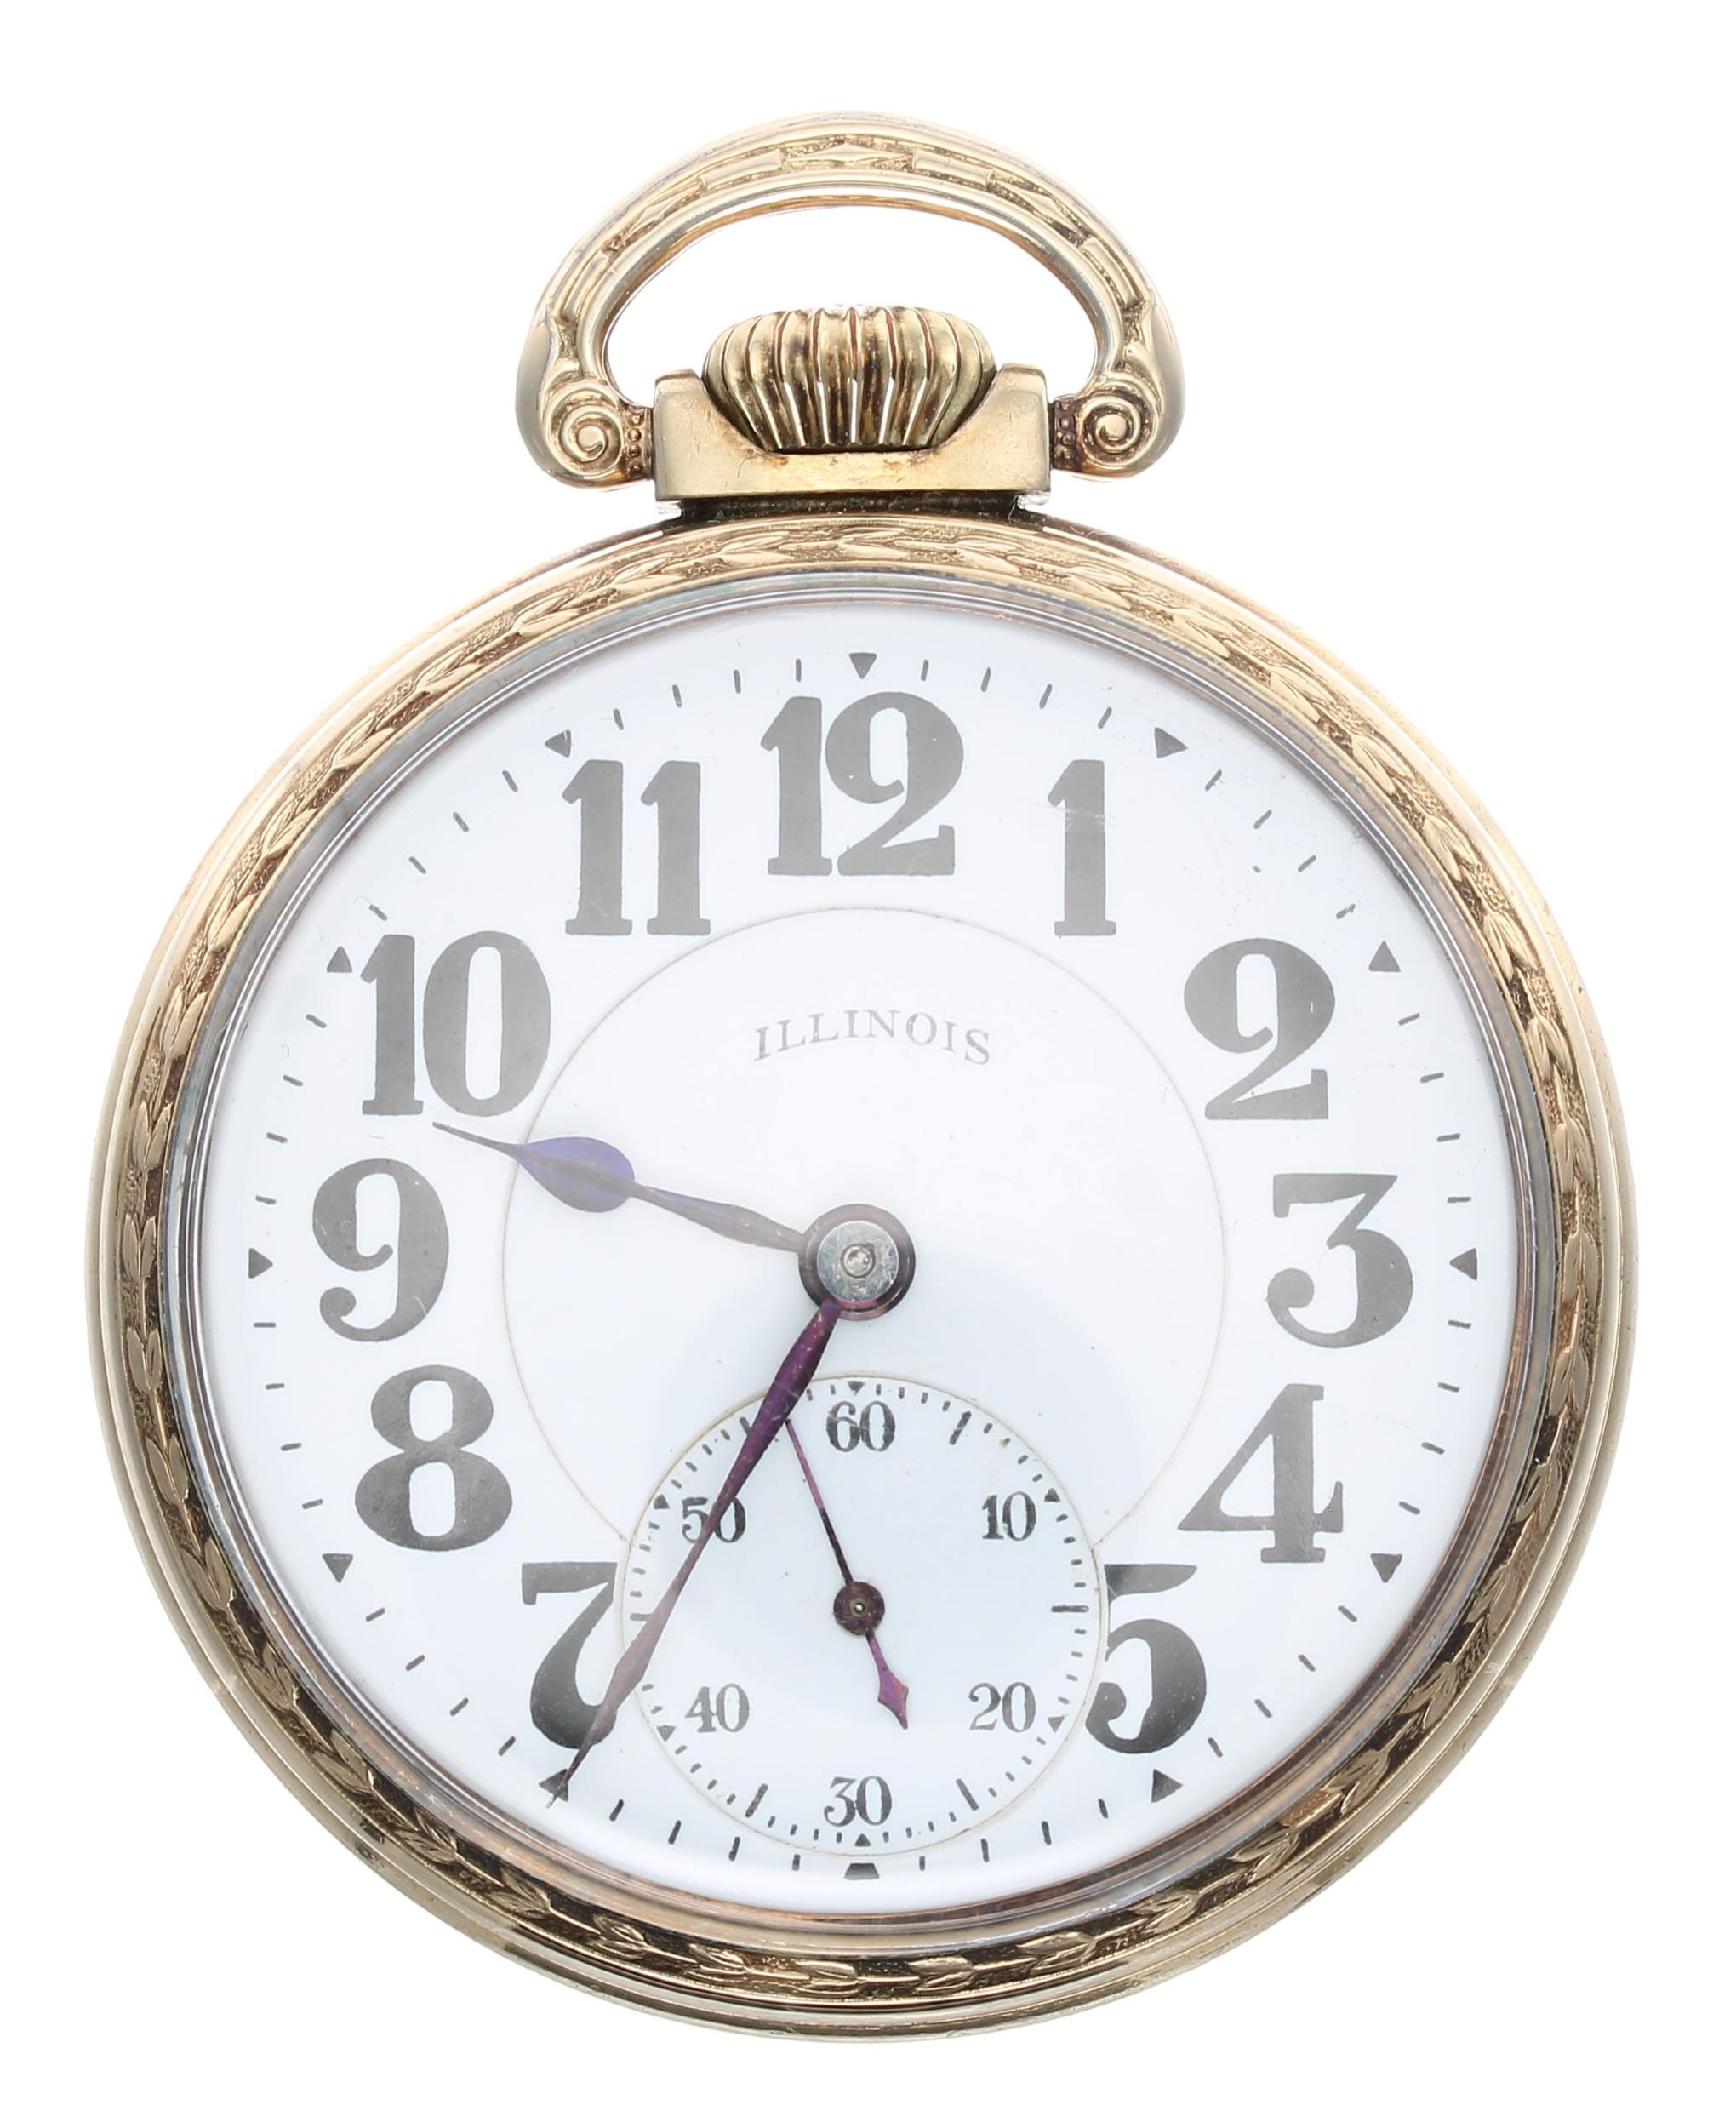 Illinois Watch Co. 'Bunn Special' 10k rolled gold lever set pocket watch, circa 1924, signed 21 - Image 2 of 4